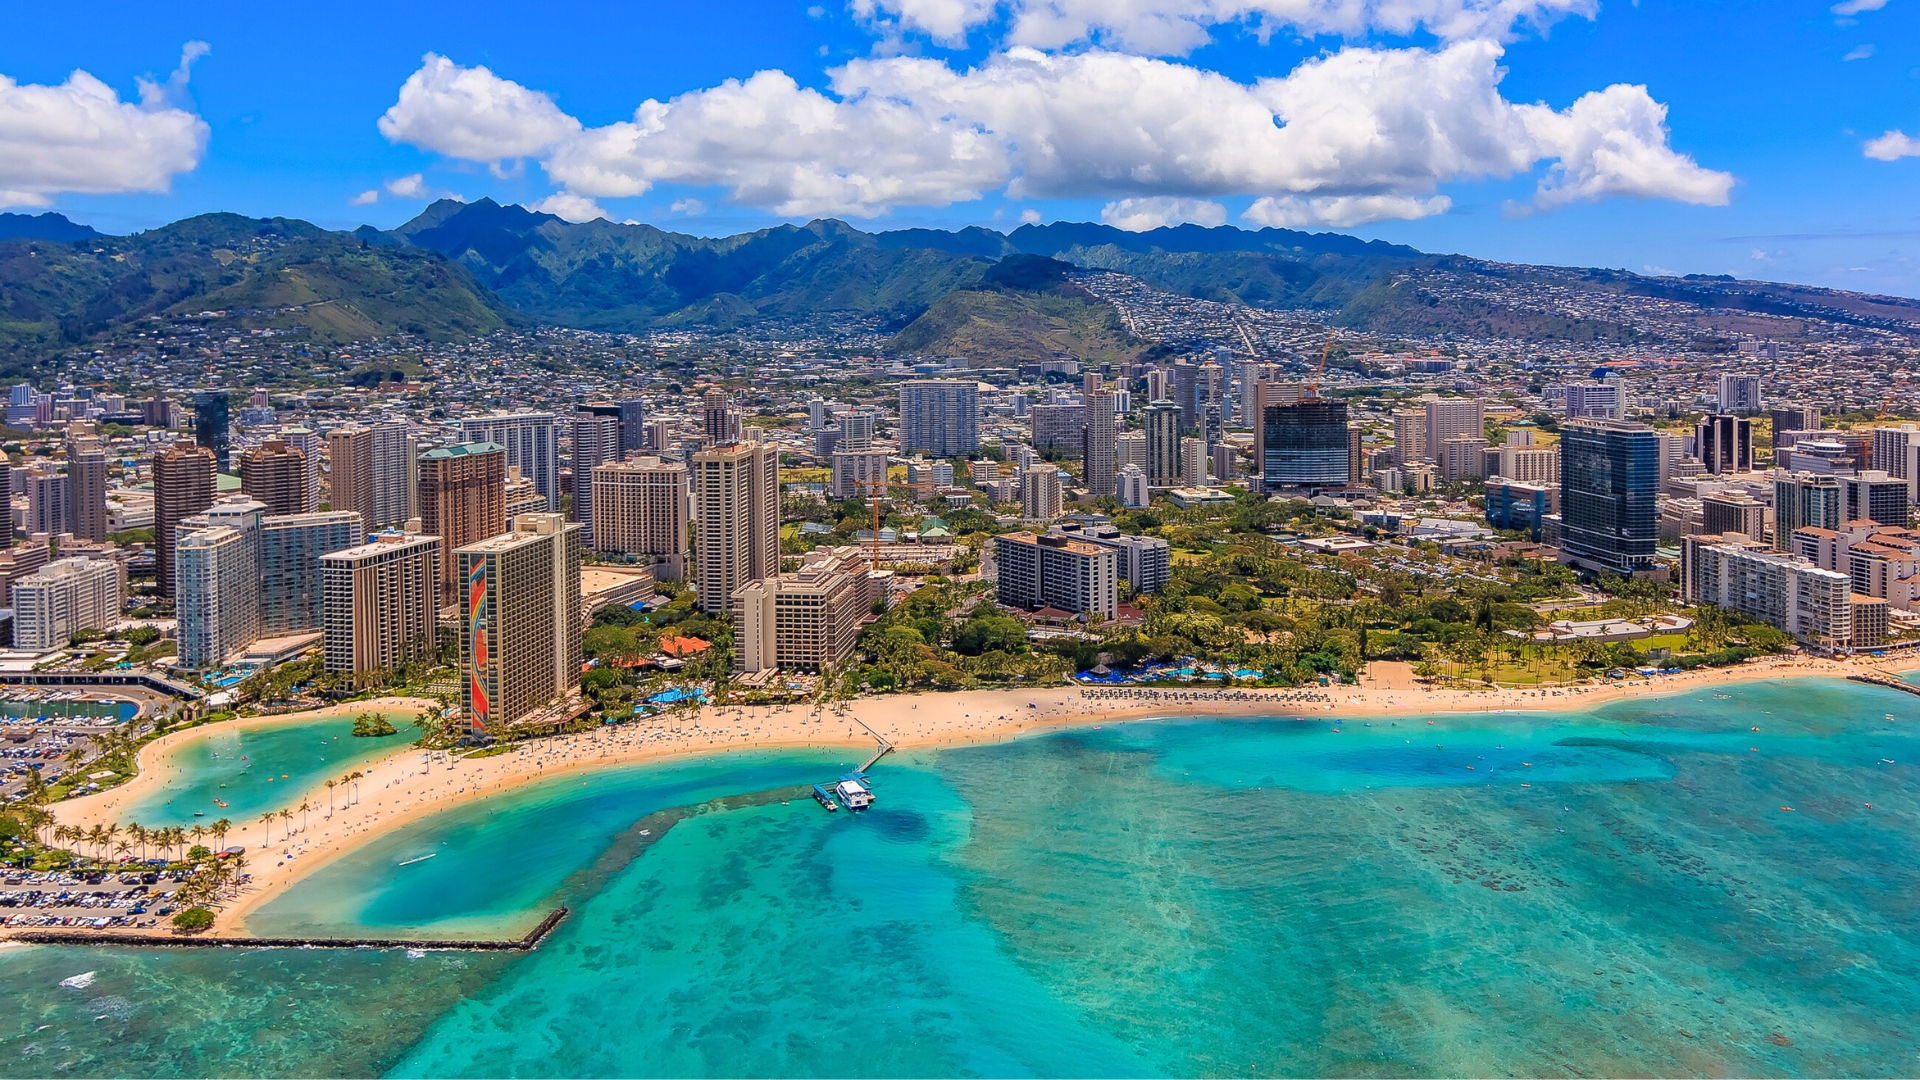 10 Questions to Ask Before Hiring a Property Manager in Hawaii